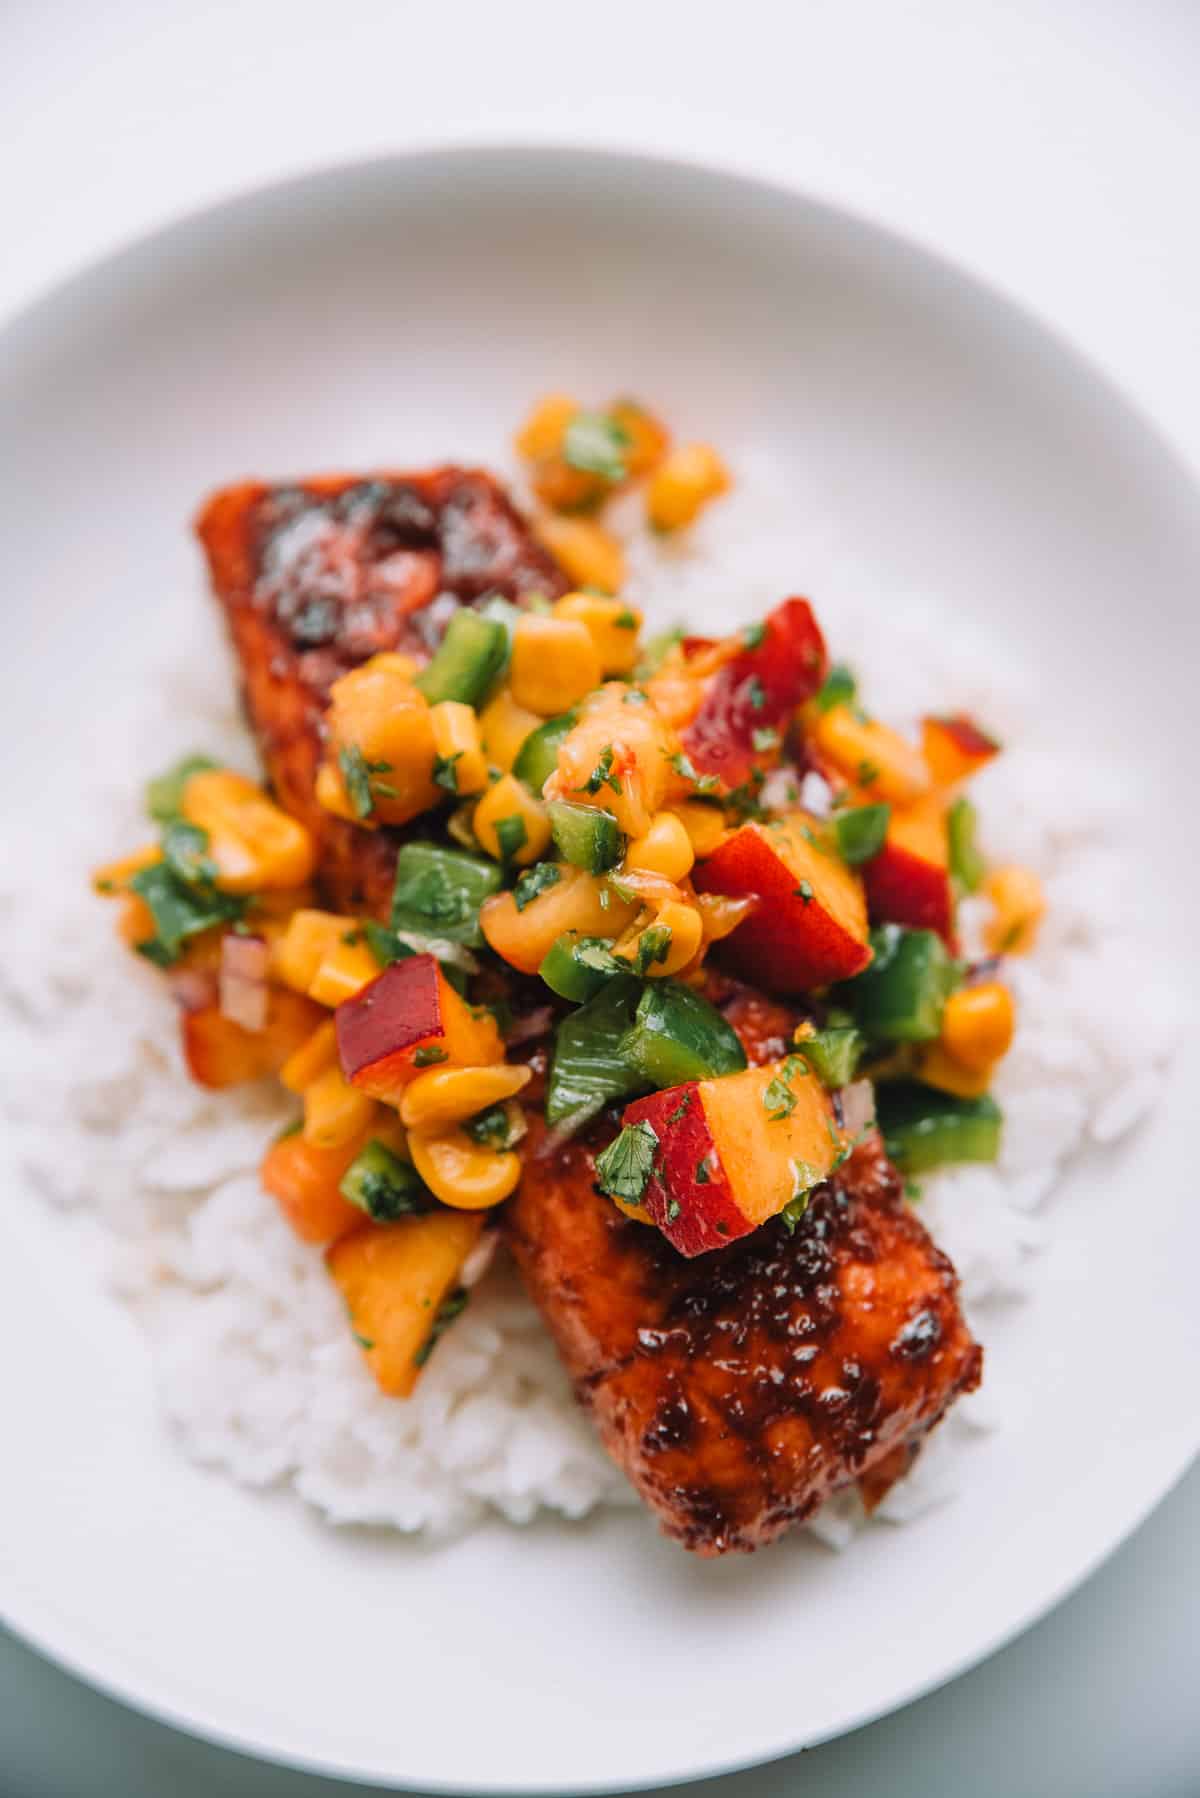 Balsamic Glazed Salmon with Peach Salsa in a bowl